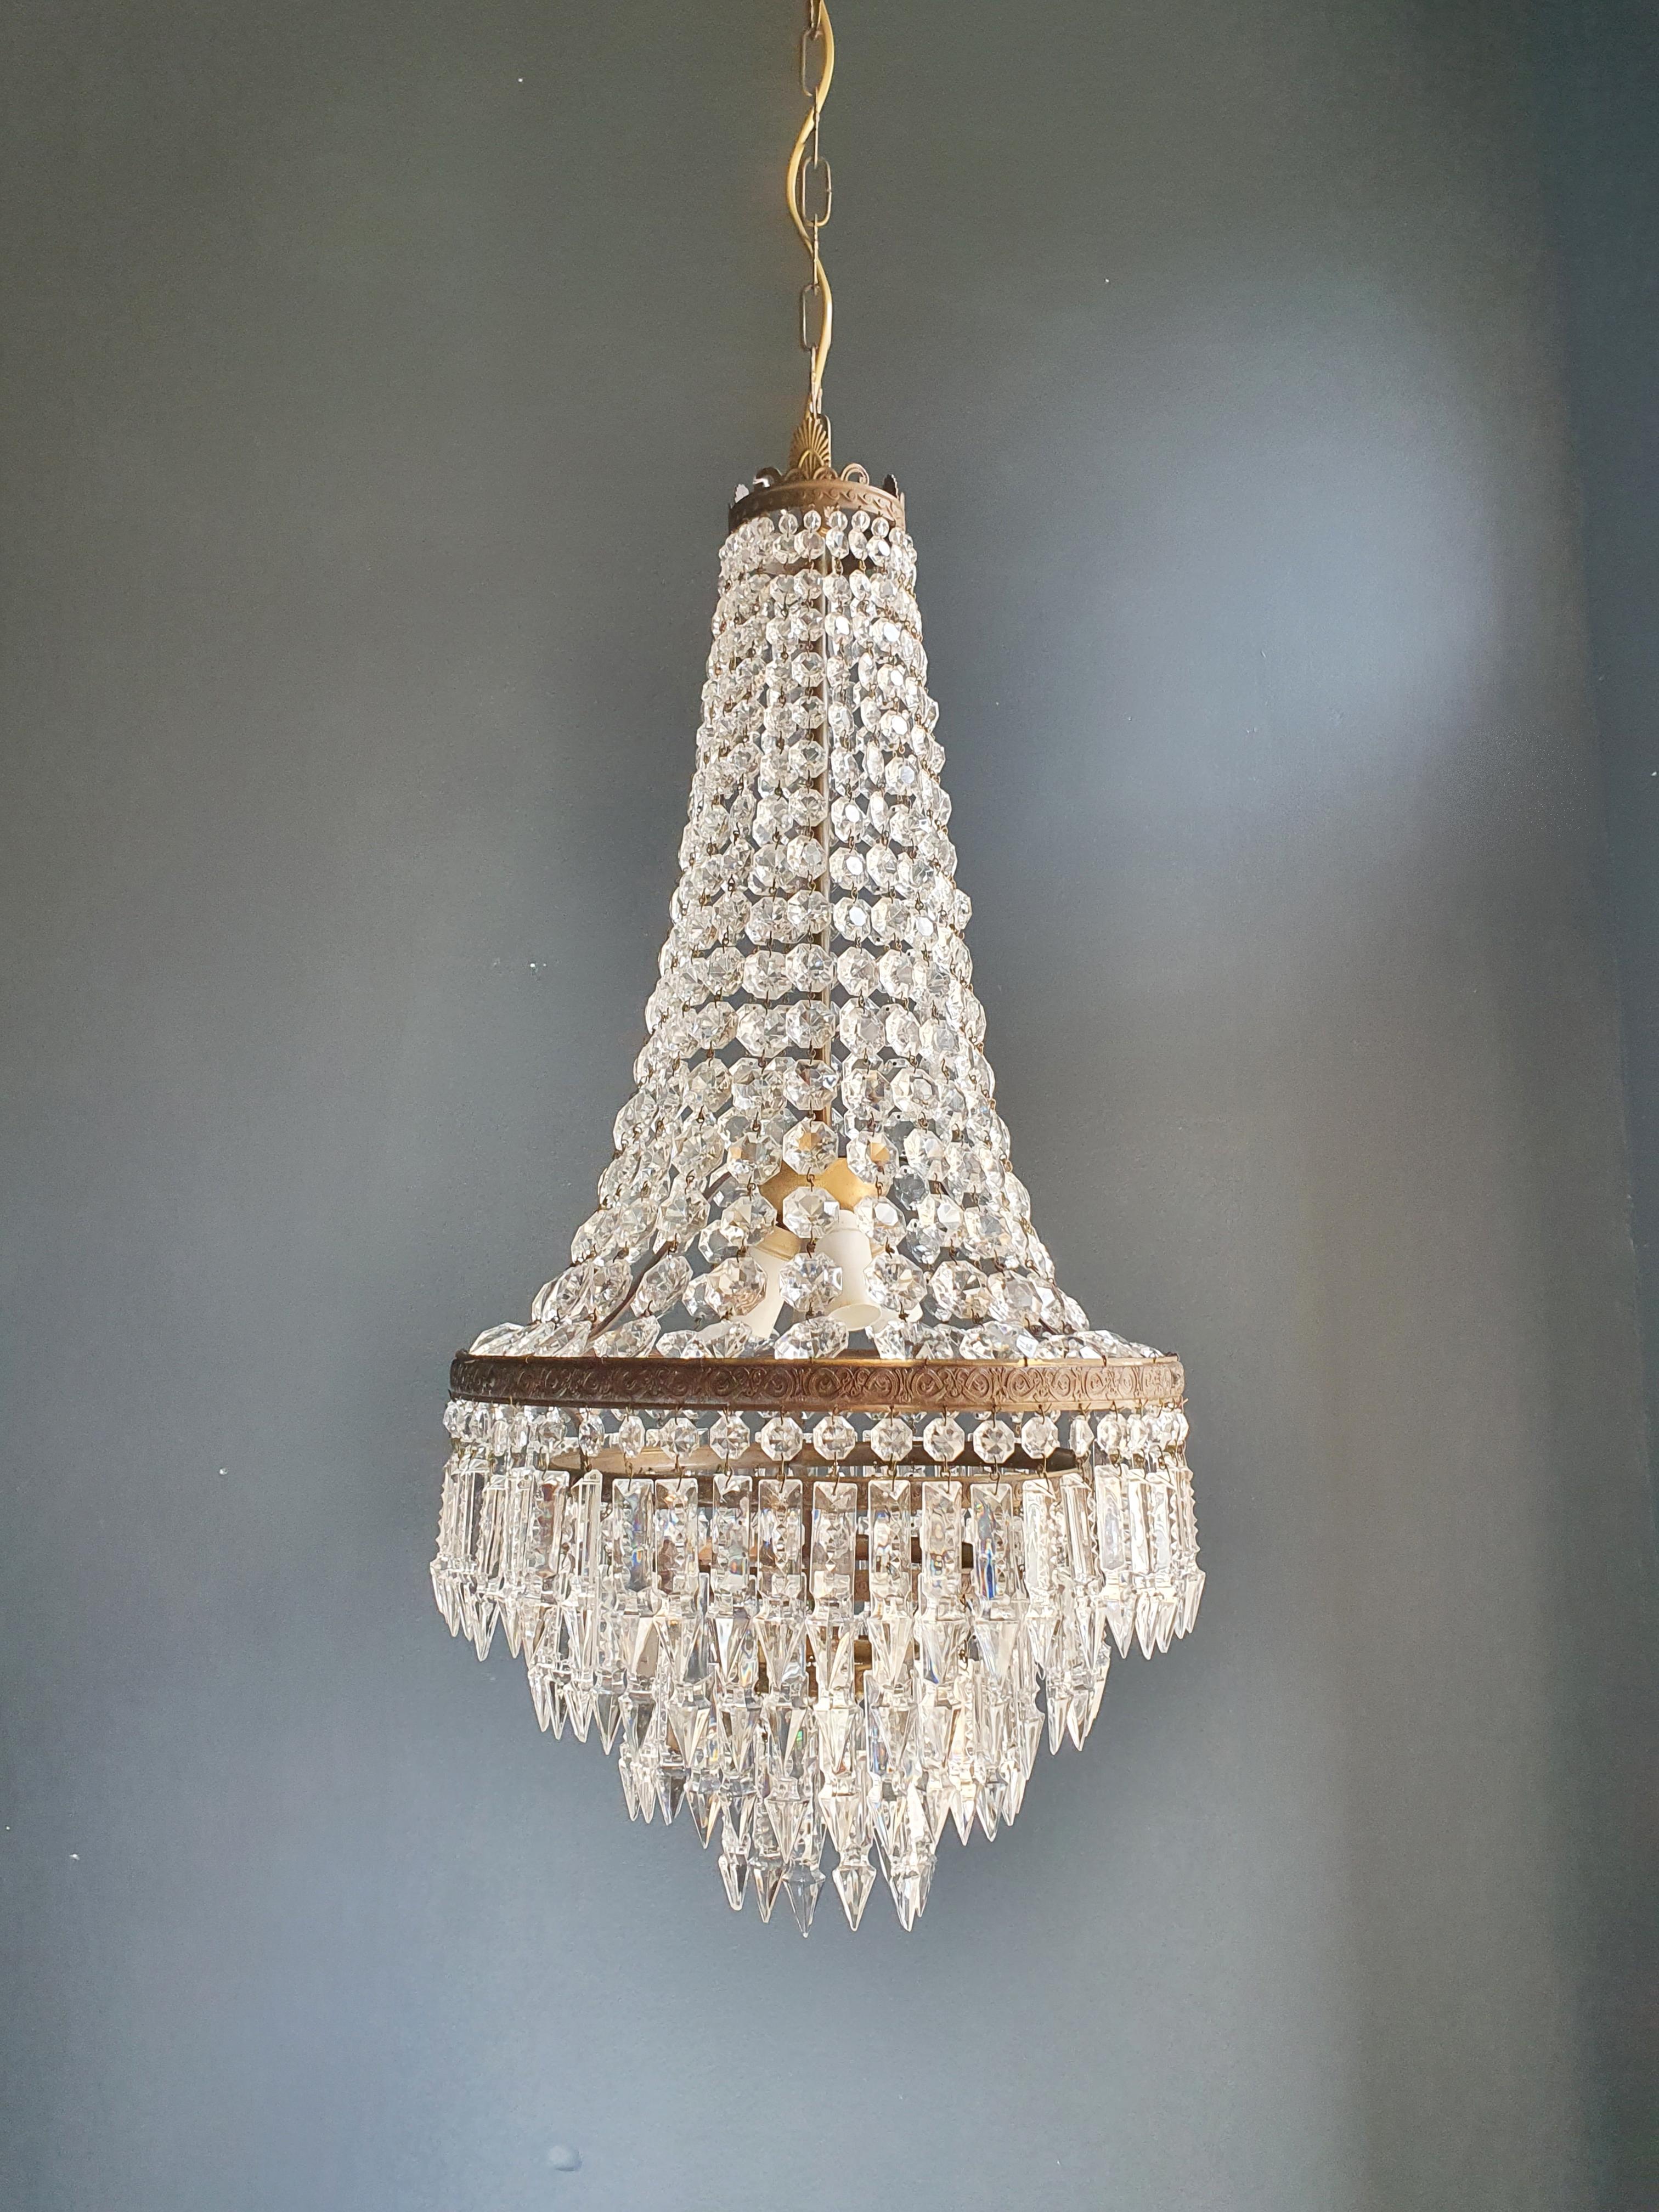 Cabling and sockets completely renewed. Crystal hand knotted
Measures: Total height 110 cm, height without chain 72cm, diameter 35 cm, weight (approximately) 6 kg.

Number of lights: 3-light bulb sockets: E14

Fine brass Empire Sac a pearl